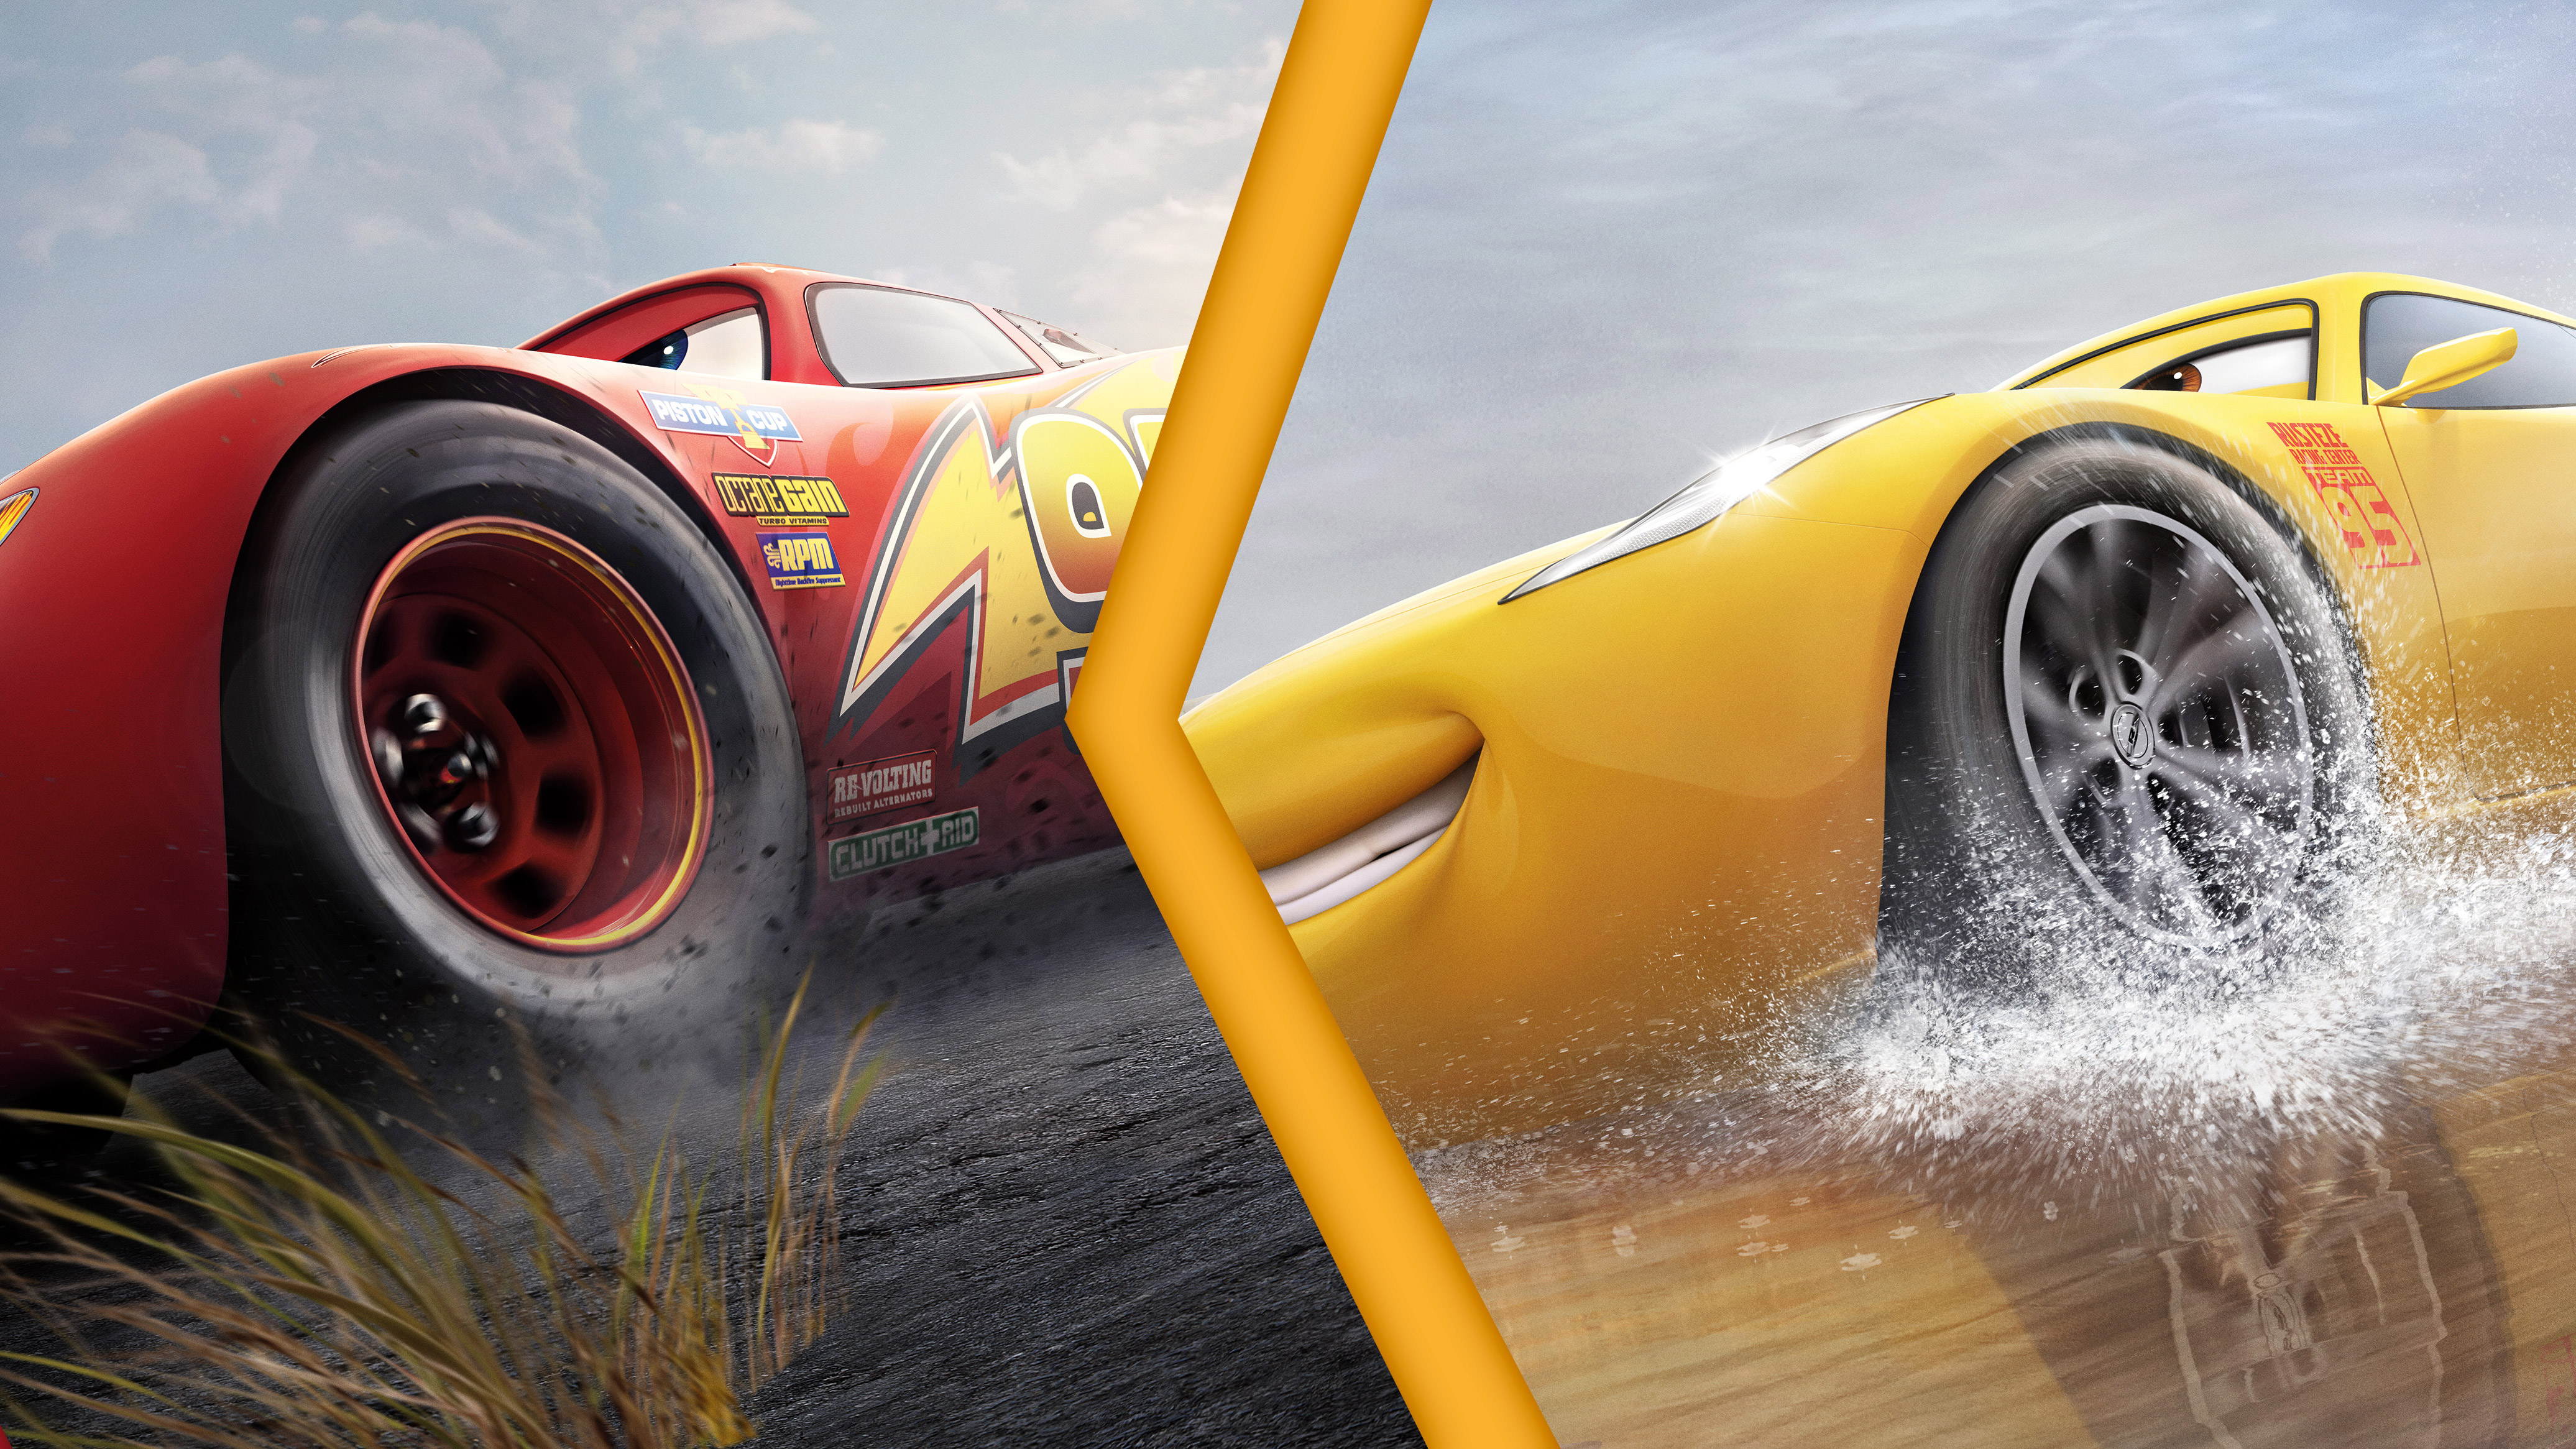 Lightning Mcqueen Vs Cruz Ramirez Cars 3 4k Hd Movies 4k Wallpapers Images Backgrounds Photos And Pictures